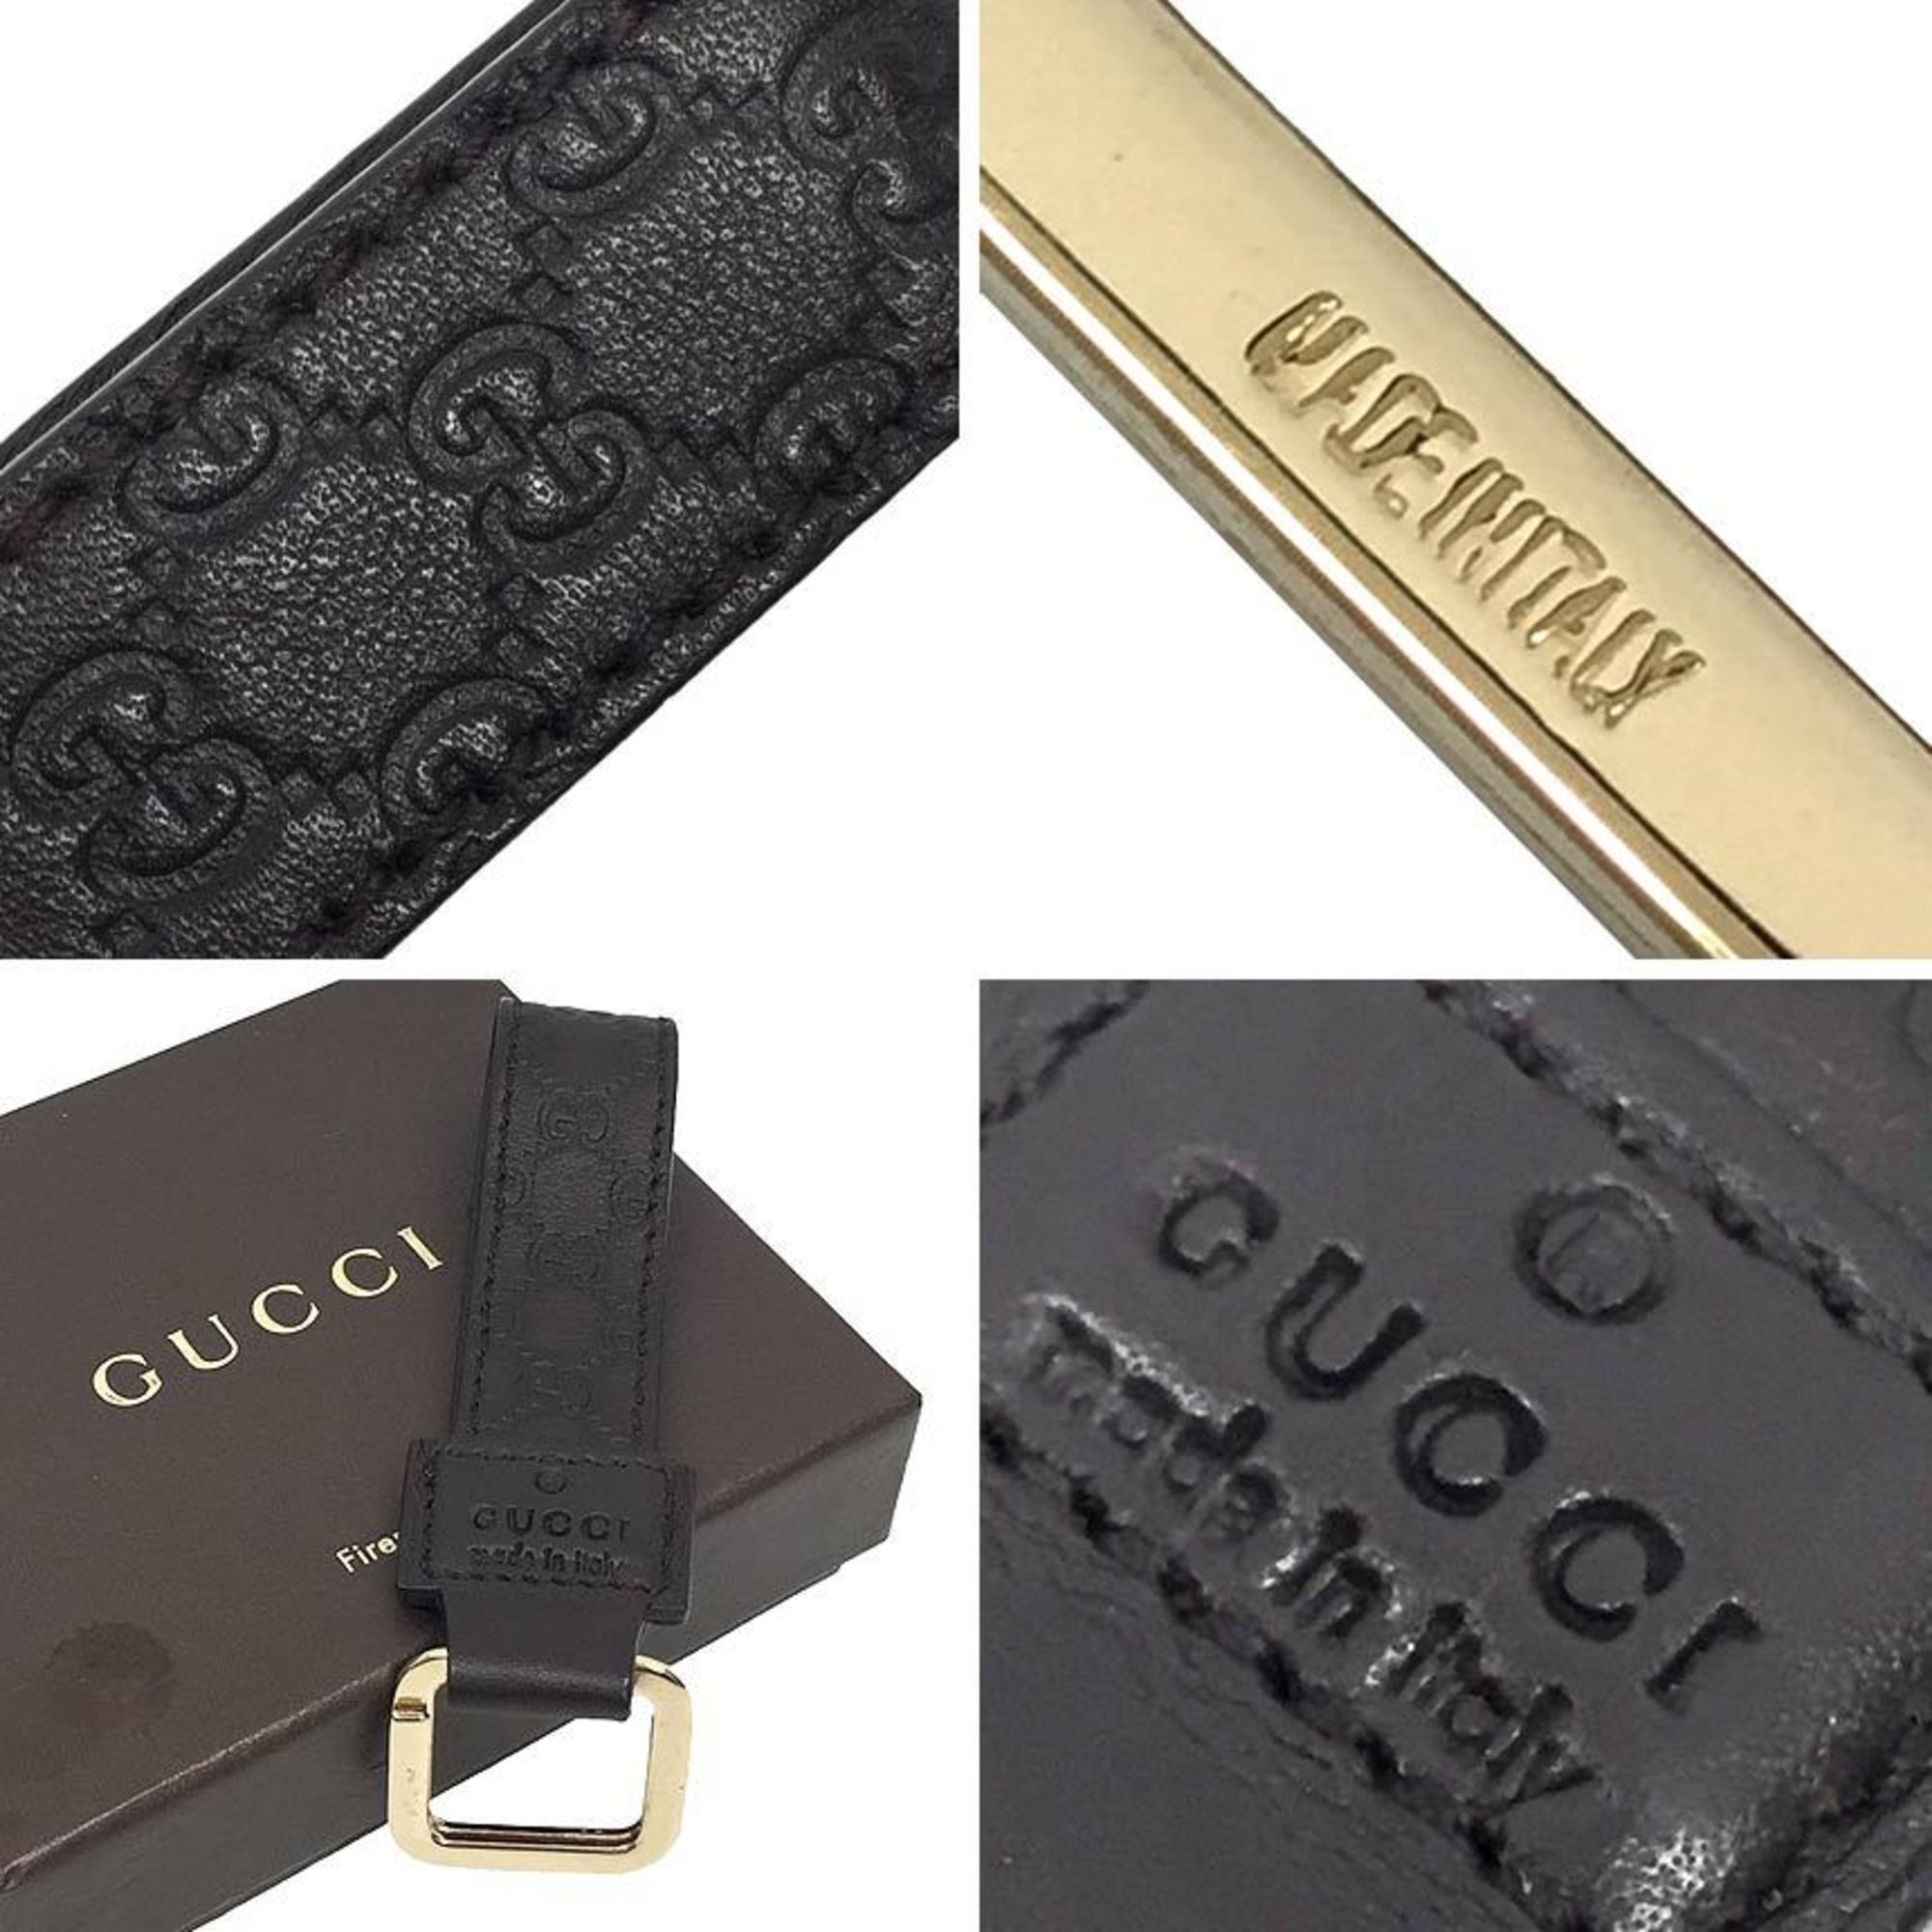 GUCCI Guccisima Keyring Charm Keychain Brown Leather Men's Women's Gucci